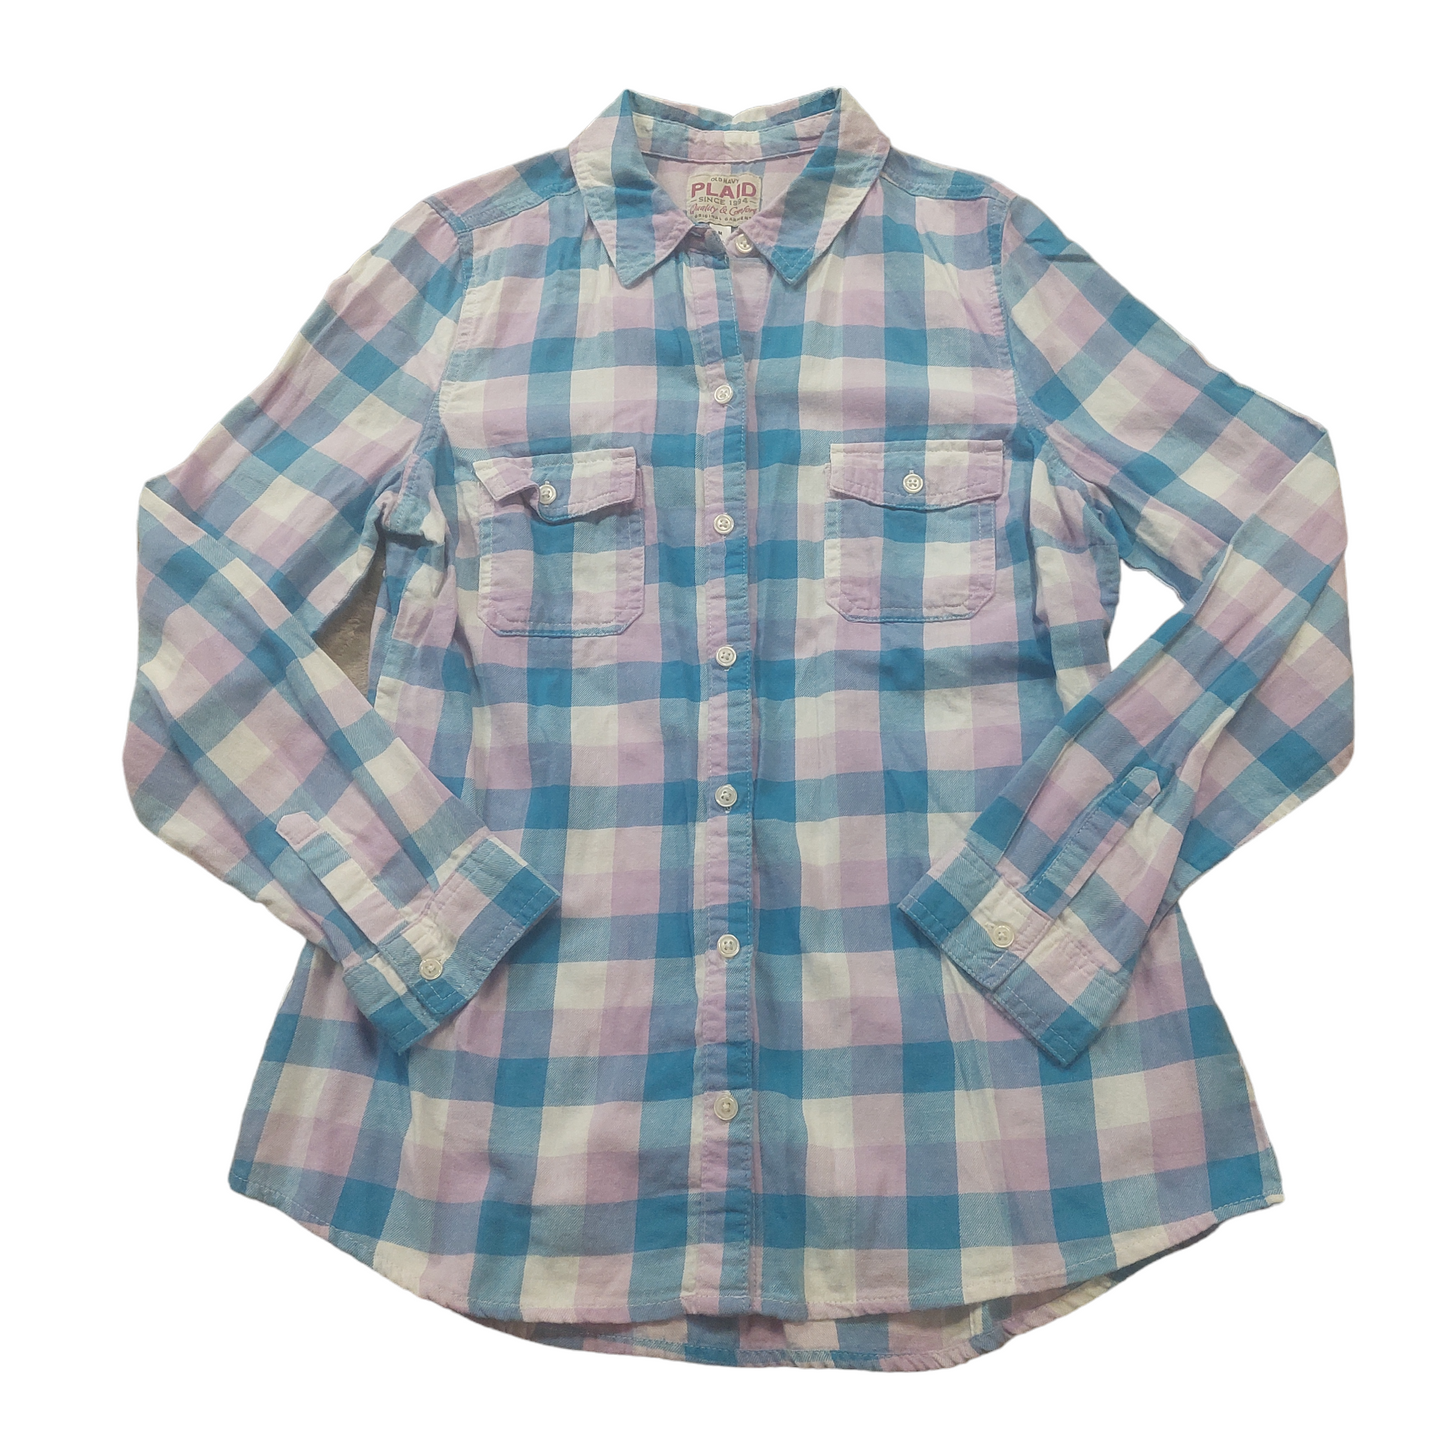 Plaid Top Long Sleeve Old Navy, Size M